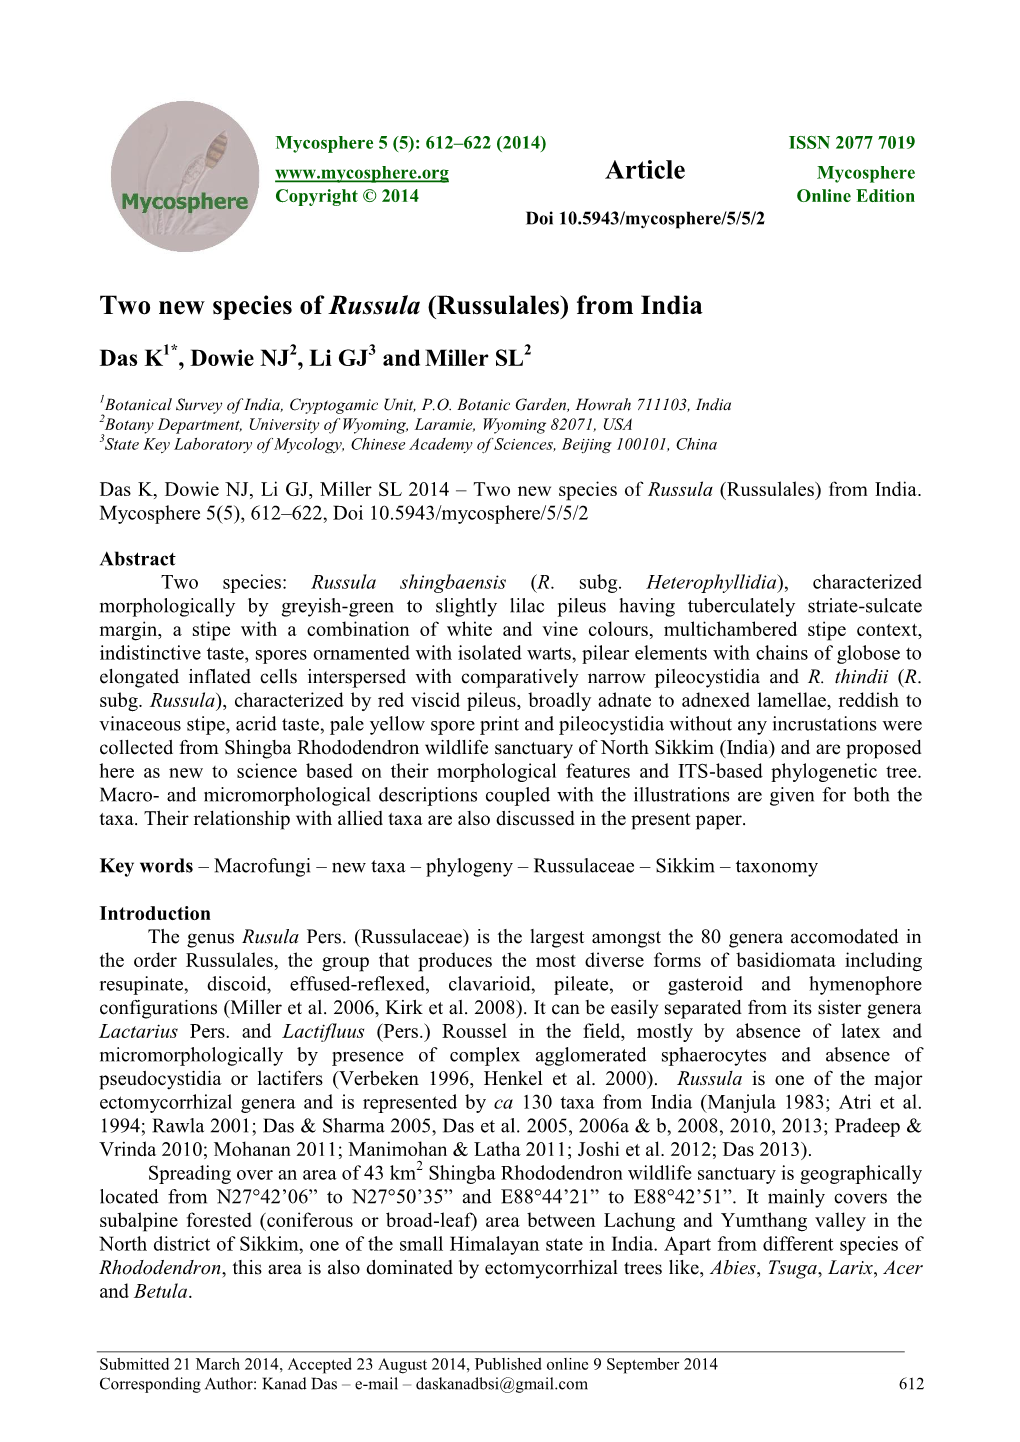 Two New Species of Russula (Russulales) from India